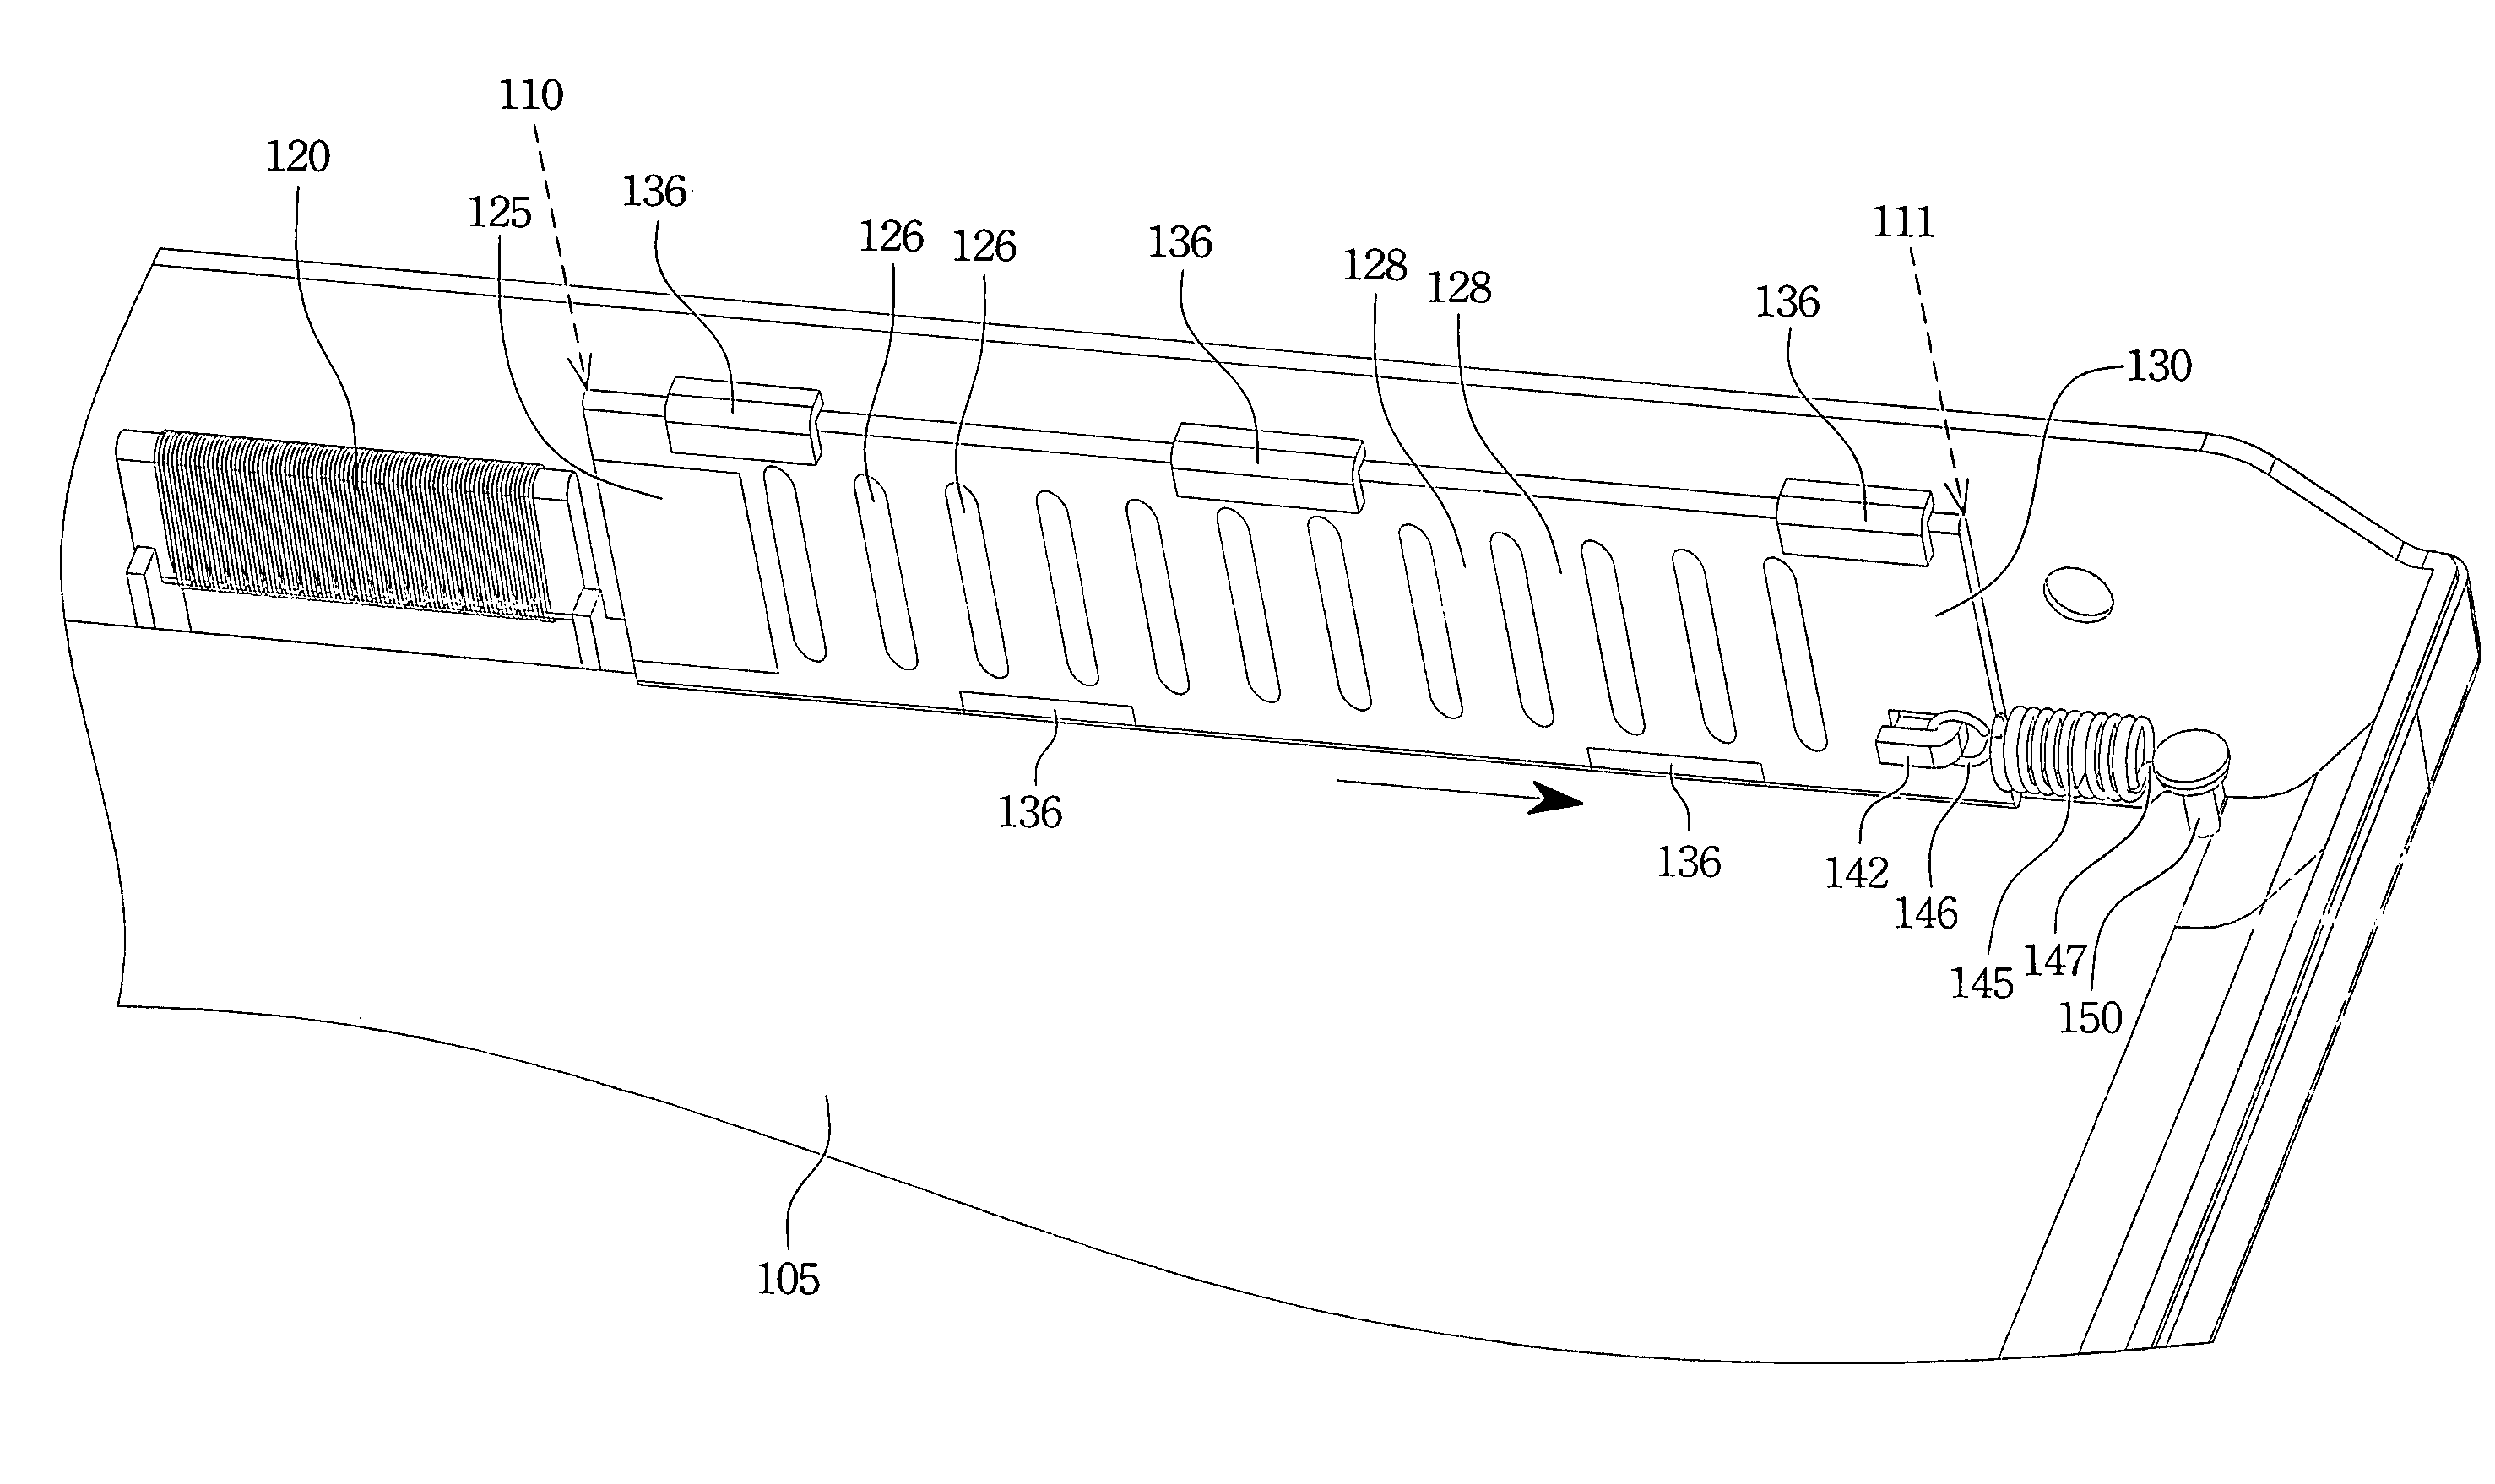 Electrical device with vents